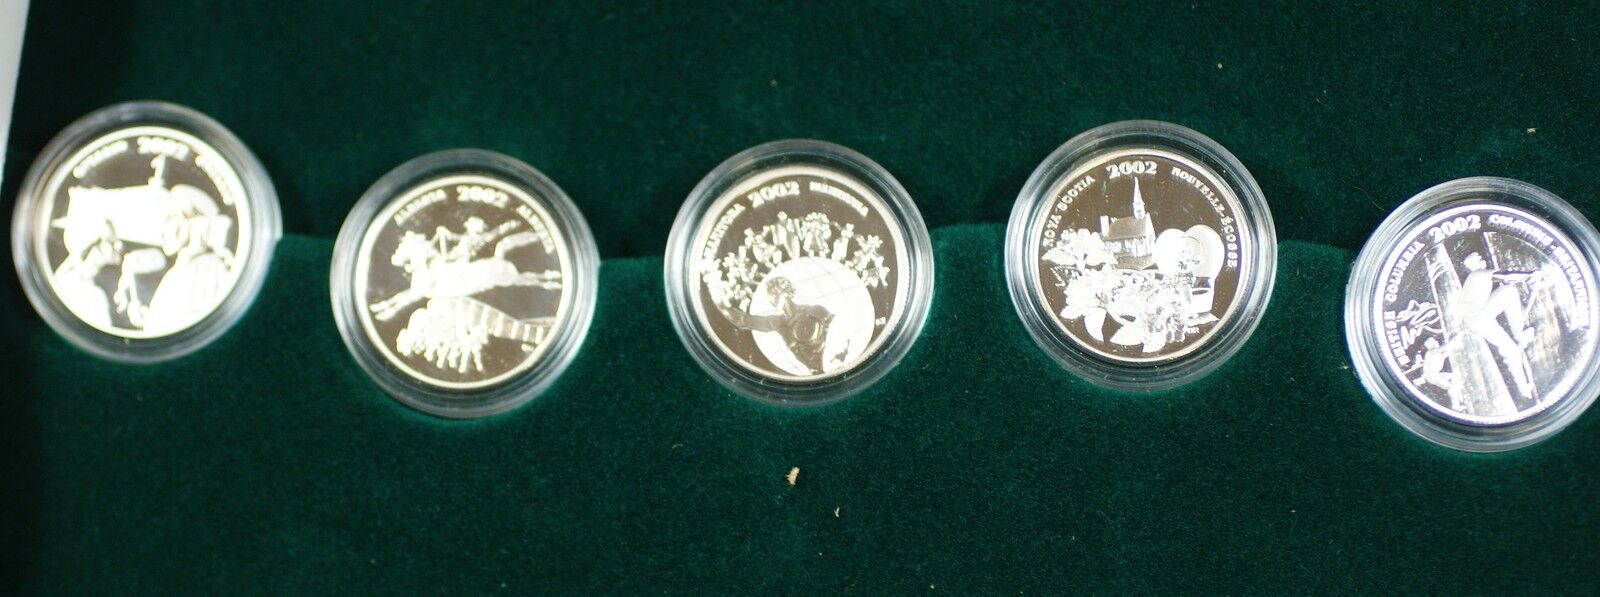 Festivals of Canada 50 Cent Proof Set- 13 Sterling Silver Proof Coins w/Box& COA